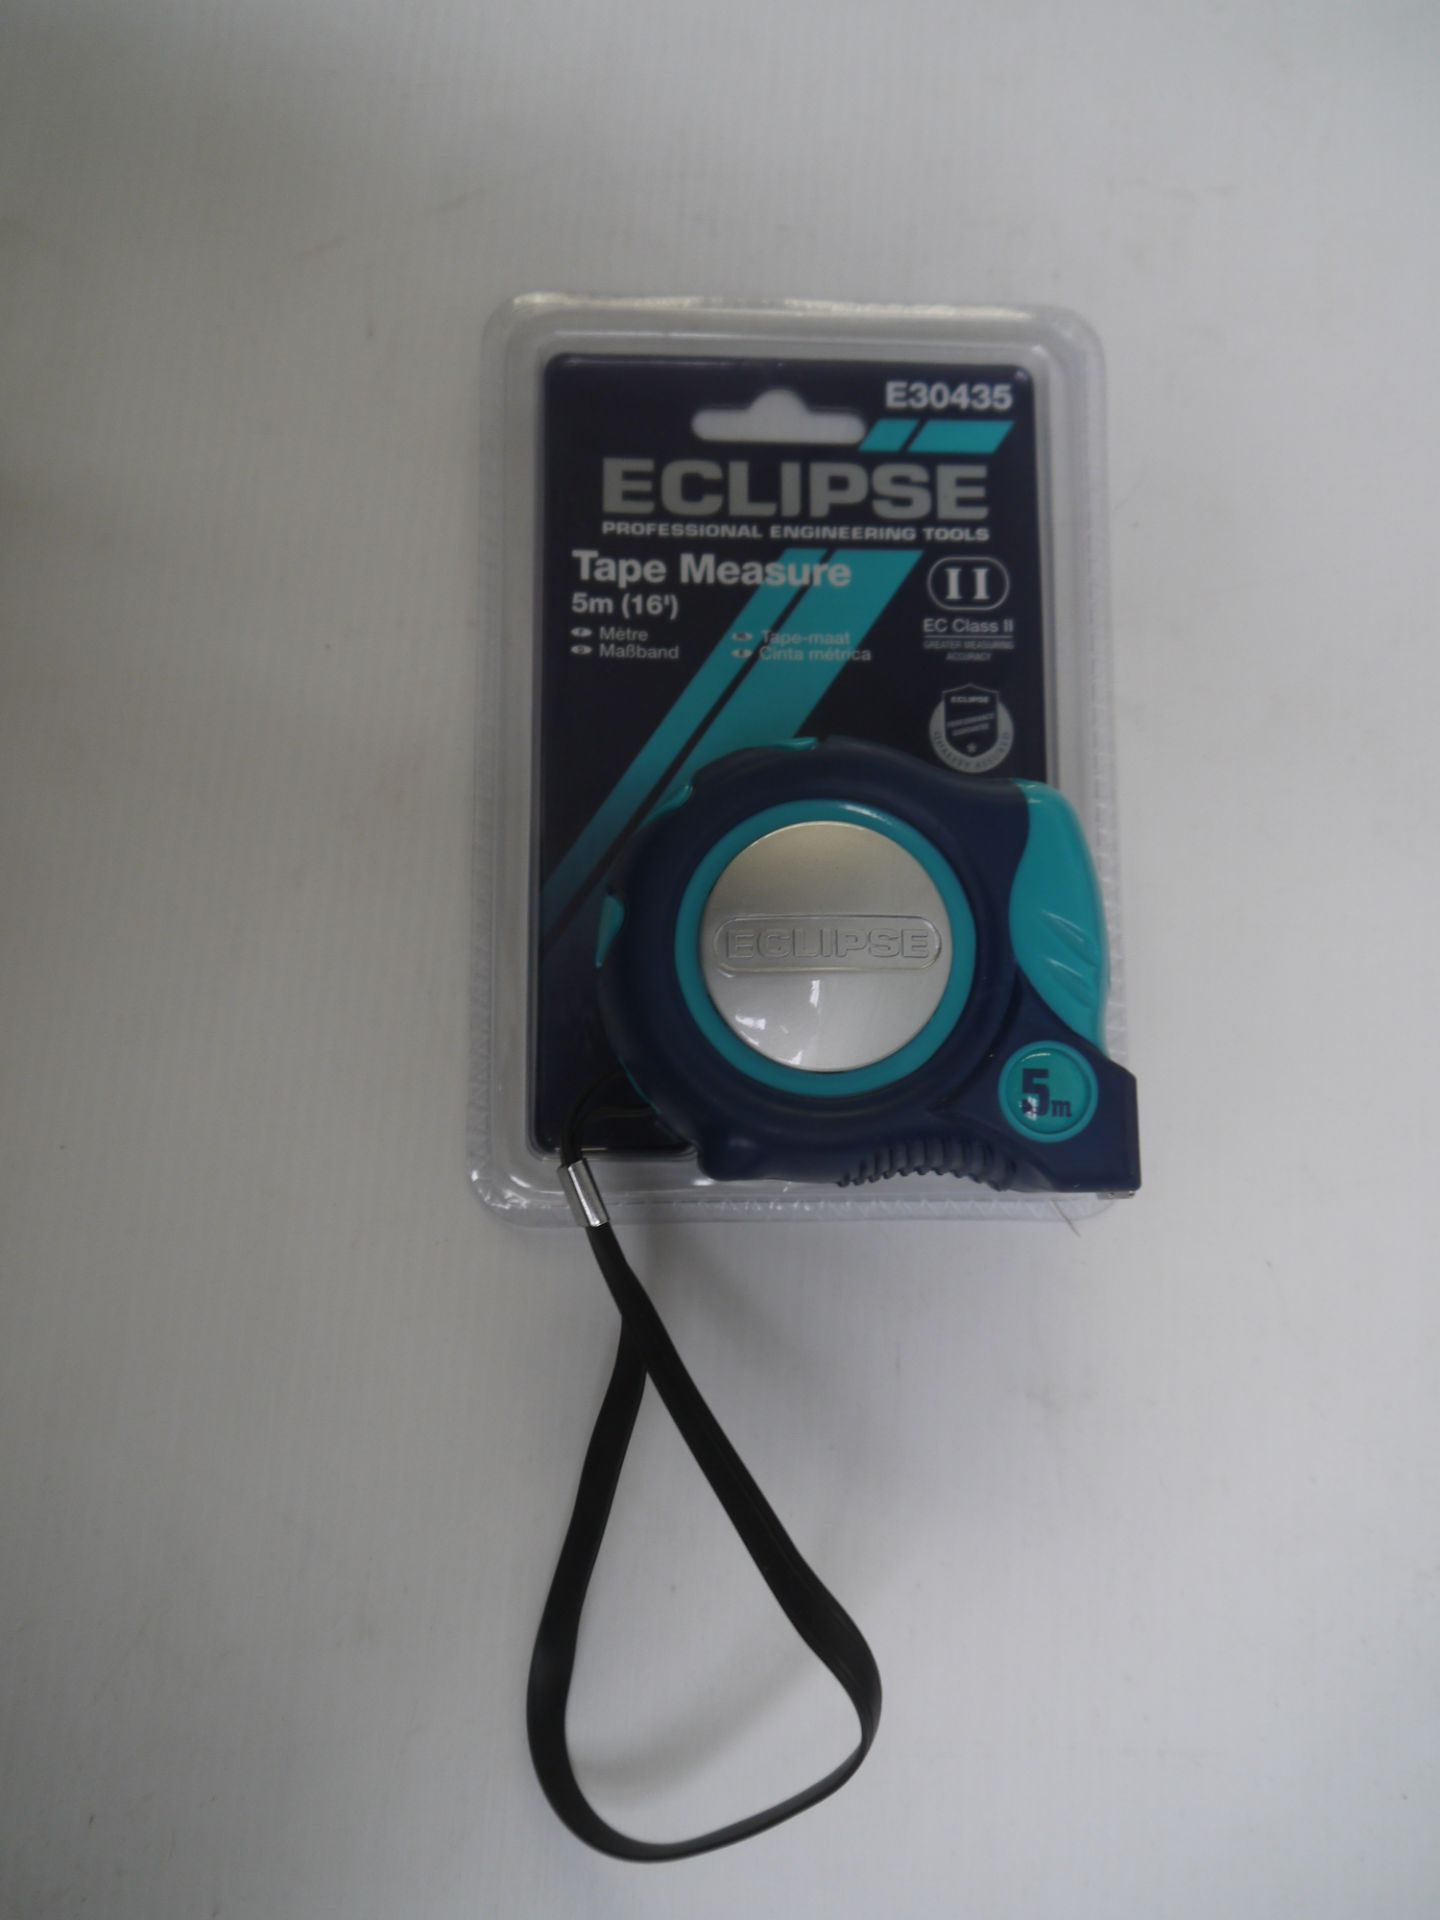 Eclipse 5mtr Tape Measure new still attached to packaging